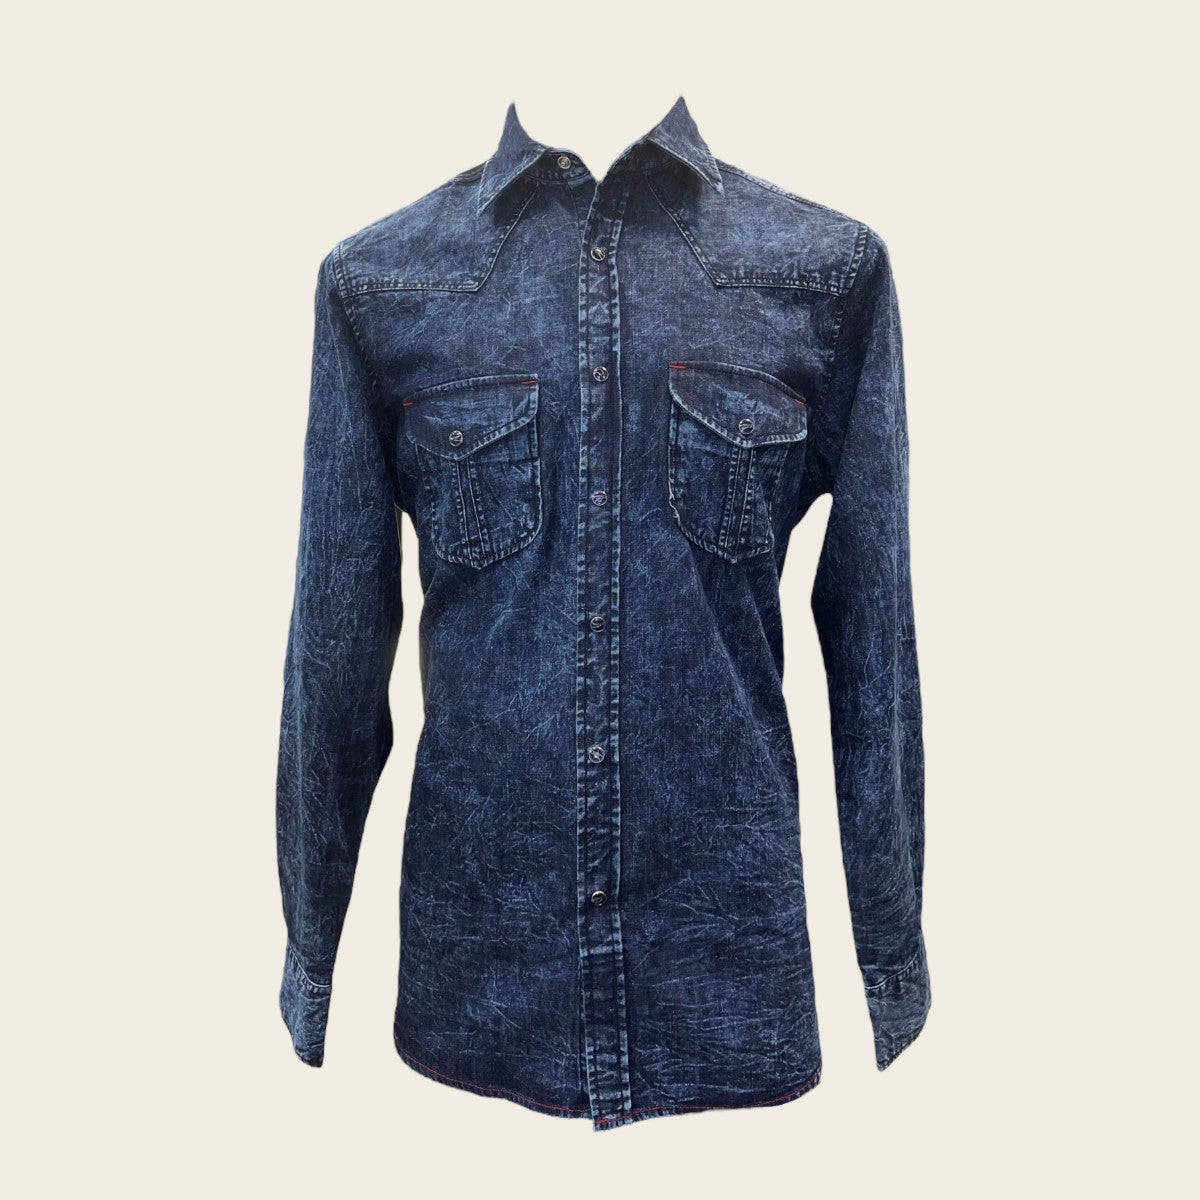 Navy blue denim shirt, washed finish with chest pockets